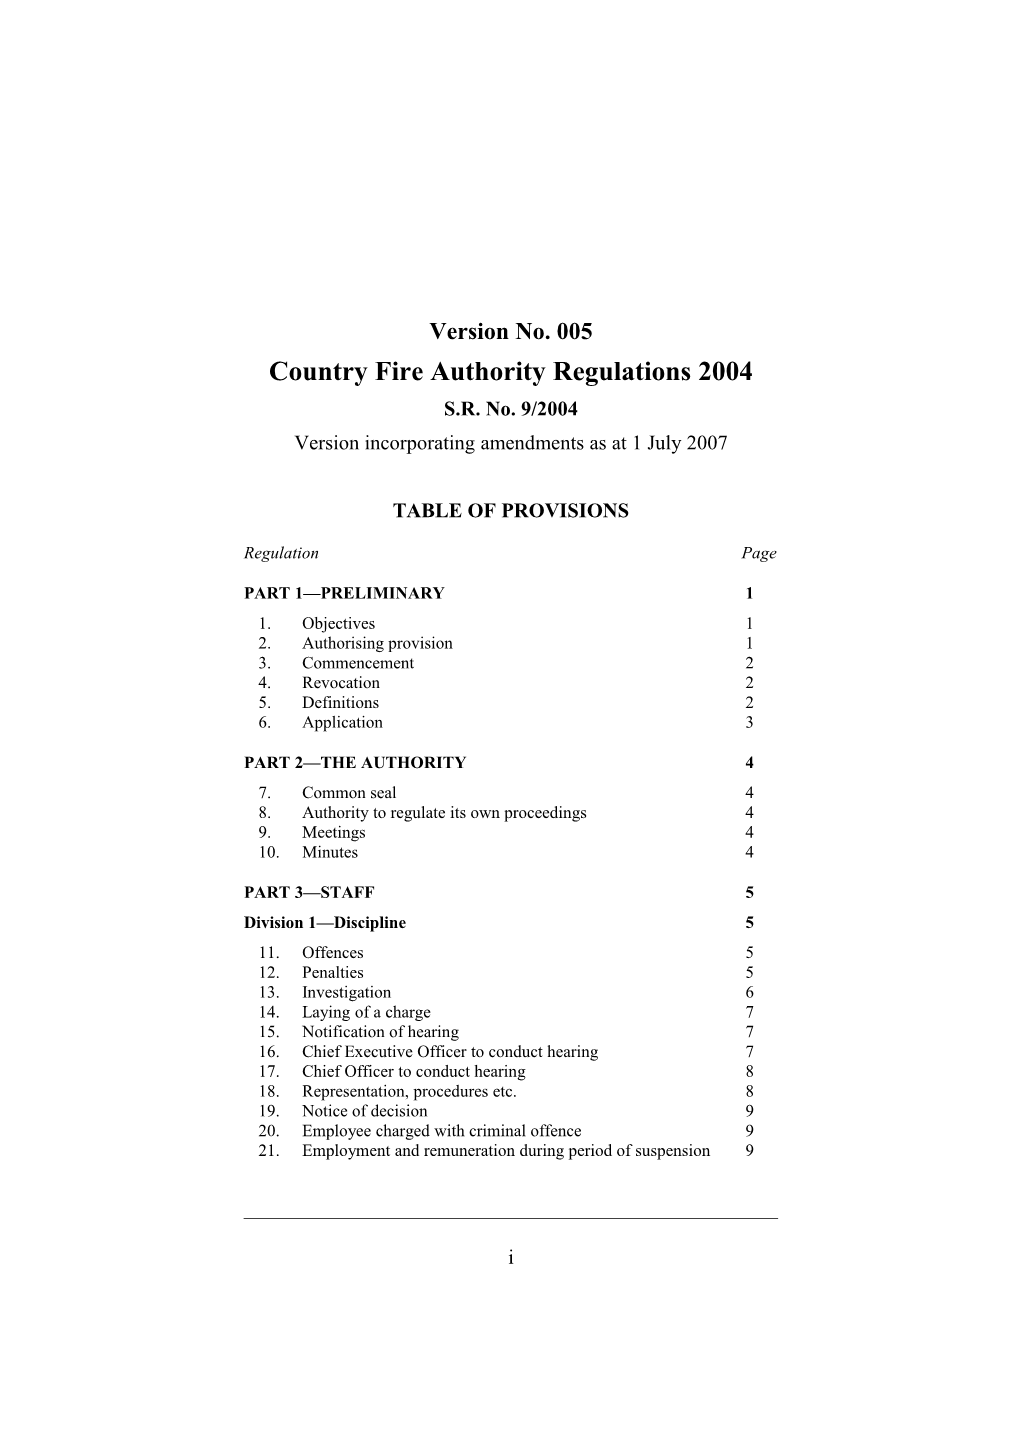 Country Fire Authority Regulations 2004